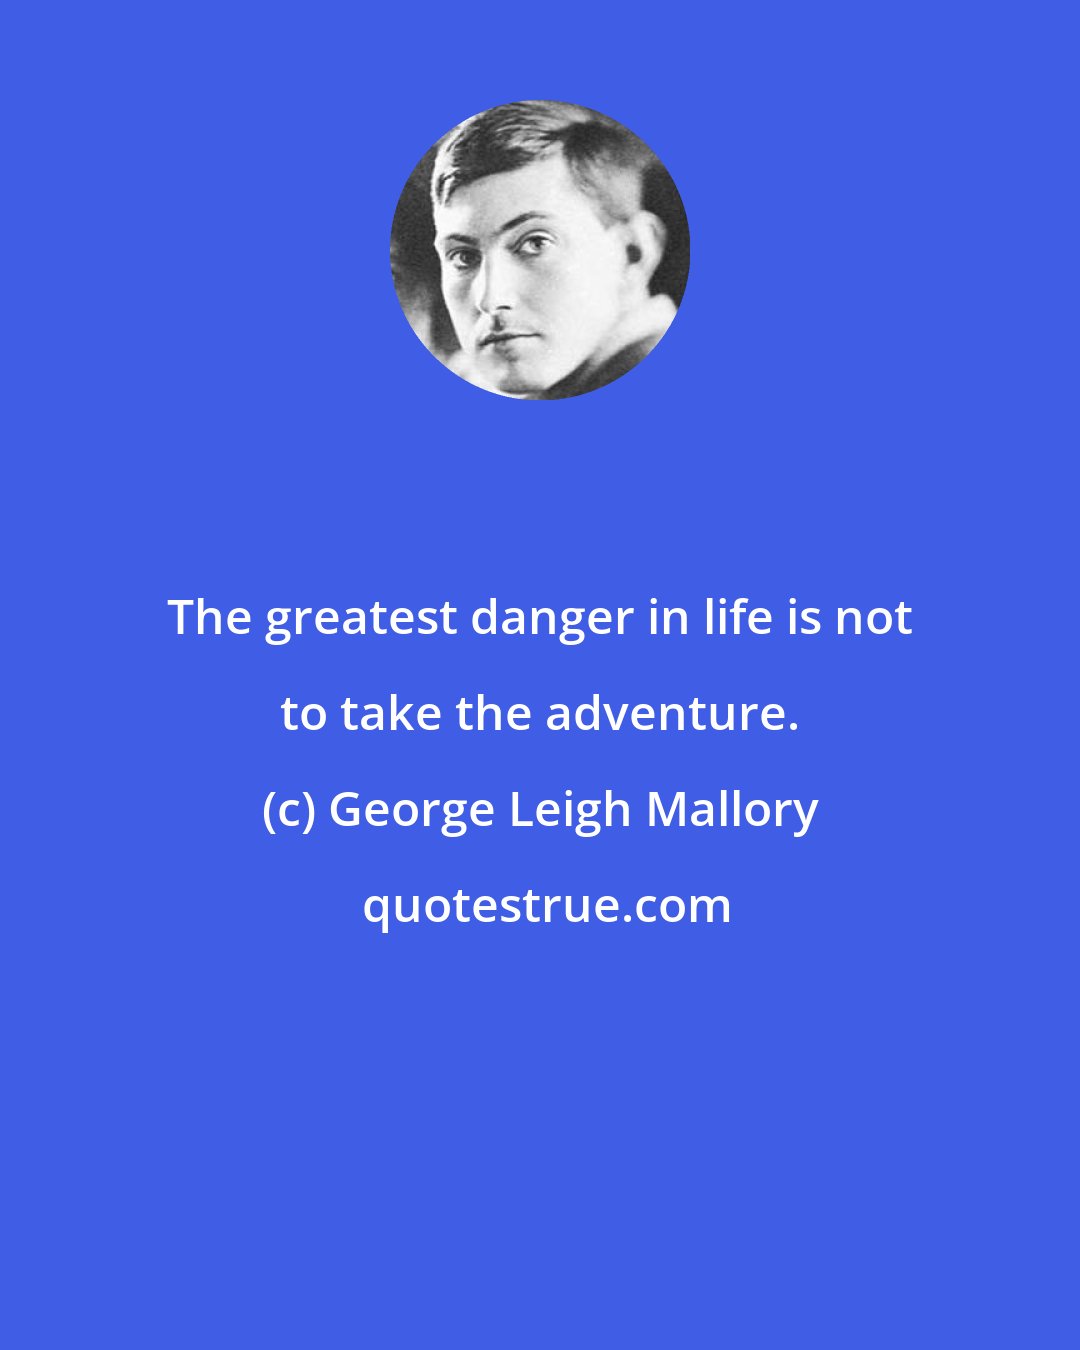 George Leigh Mallory: The greatest danger in life is not to take the adventure.